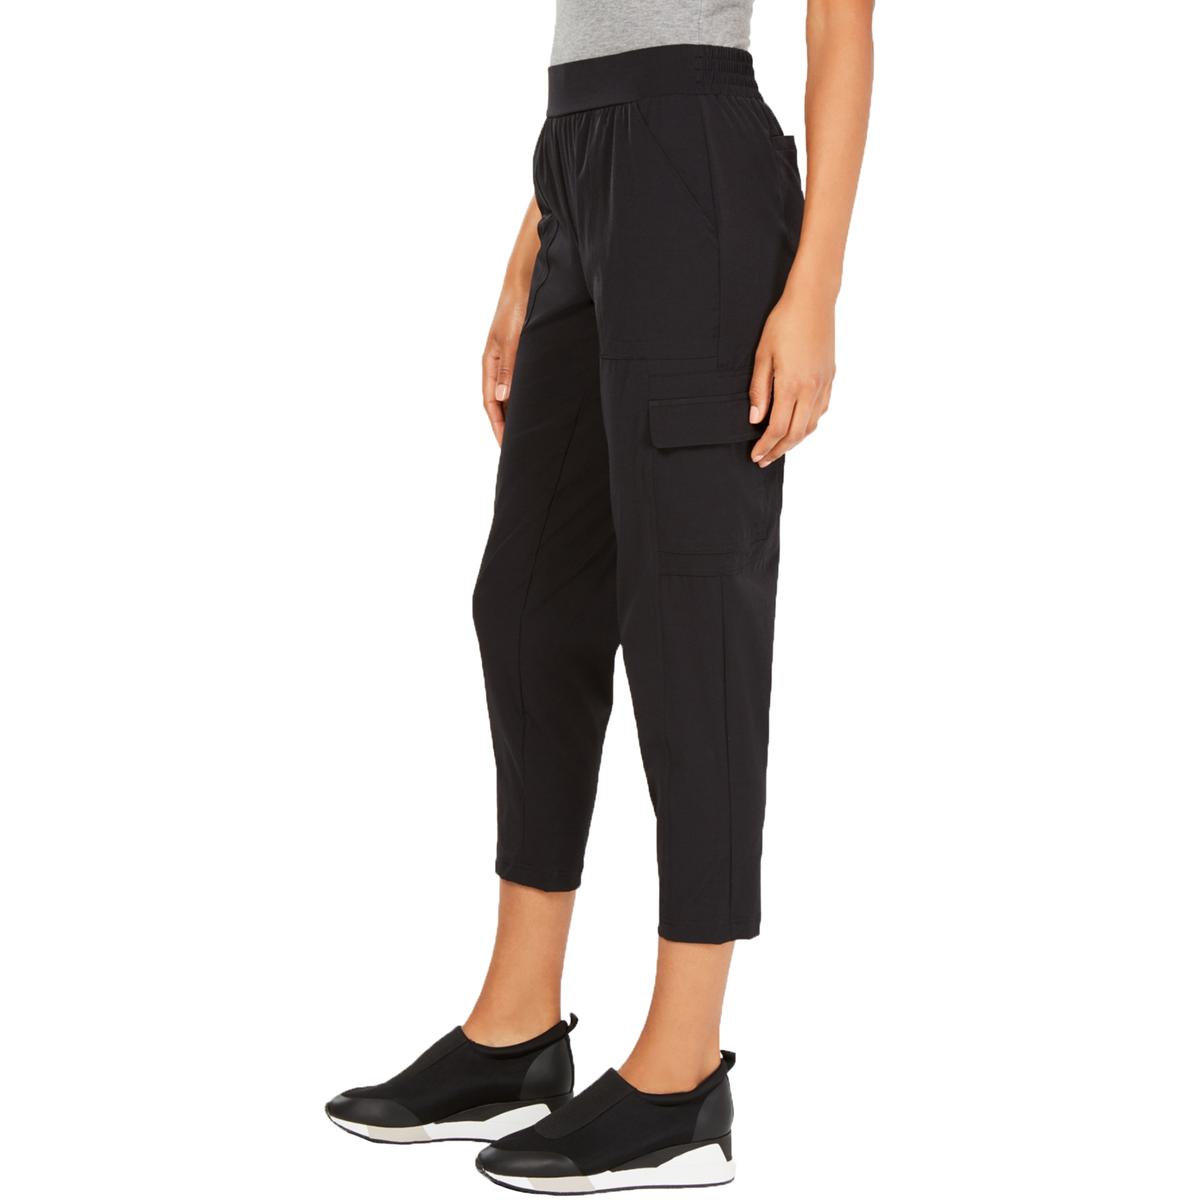 Ideology Womens Black Fitness Running Workout Pants Athletic XL BHFO ...